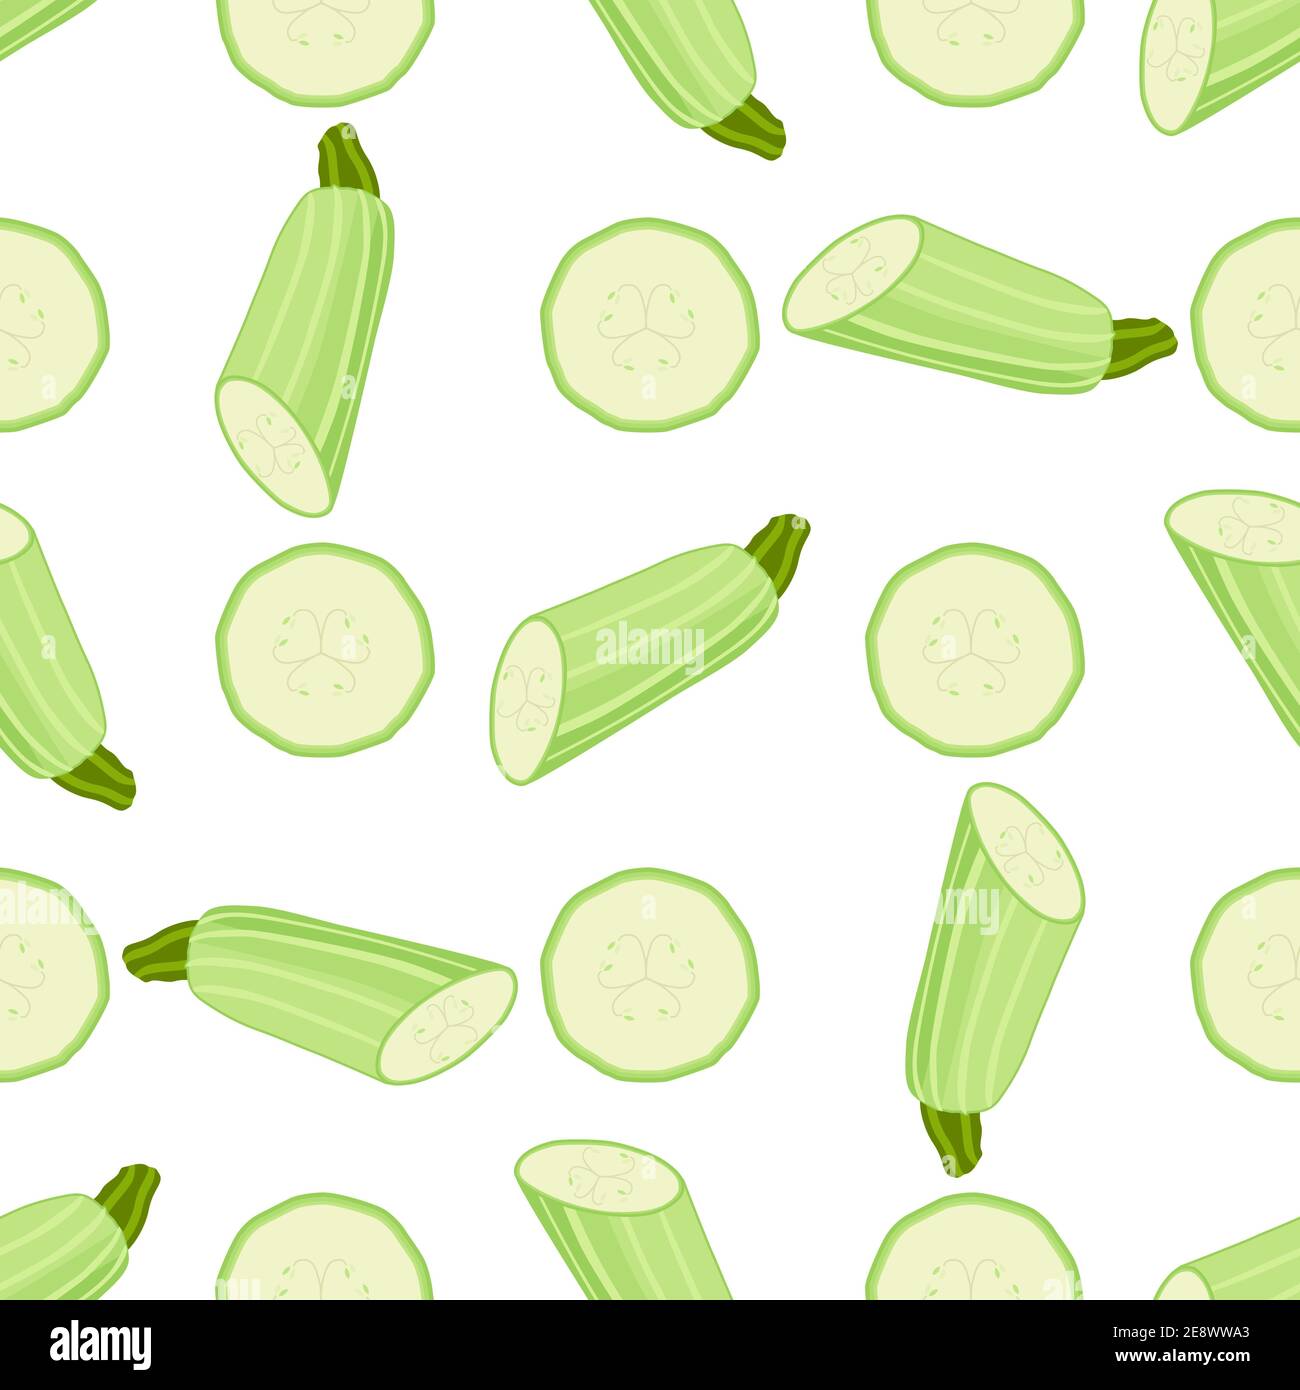 Illustration on theme of bright pattern zucchini, vegetable squash for seal. Vegetable pattern consisting of beautiful zucchini, many squash. Simple c Stock Vector